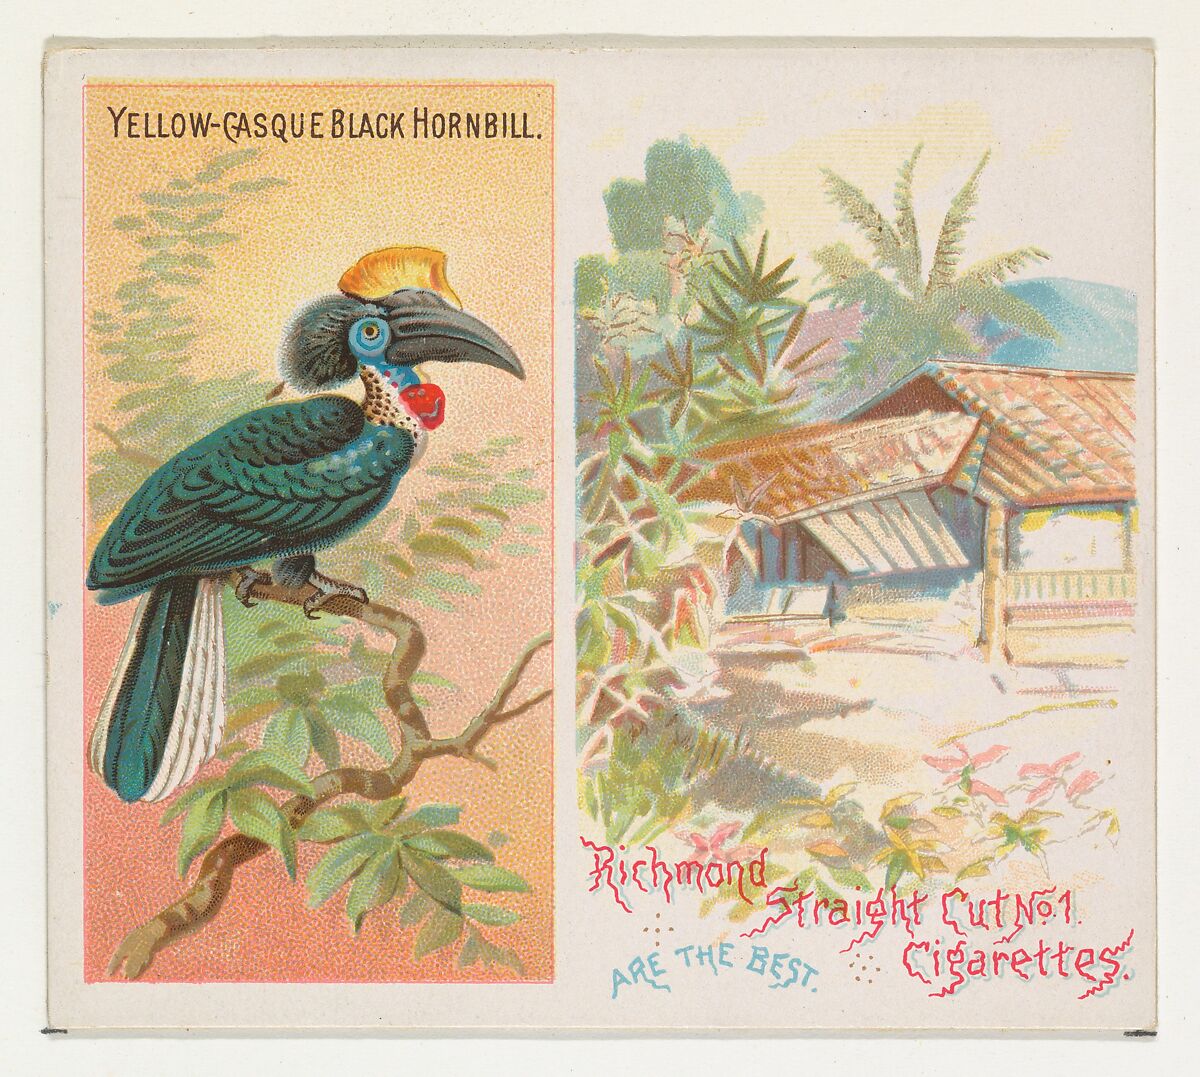 Yellow-Casque Black Hornbill, from Birds of the Tropics series (N38) for Allen & Ginter Cigarettes, Issued by Allen &amp; Ginter (American, Richmond, Virginia), Commercial color lithograph 